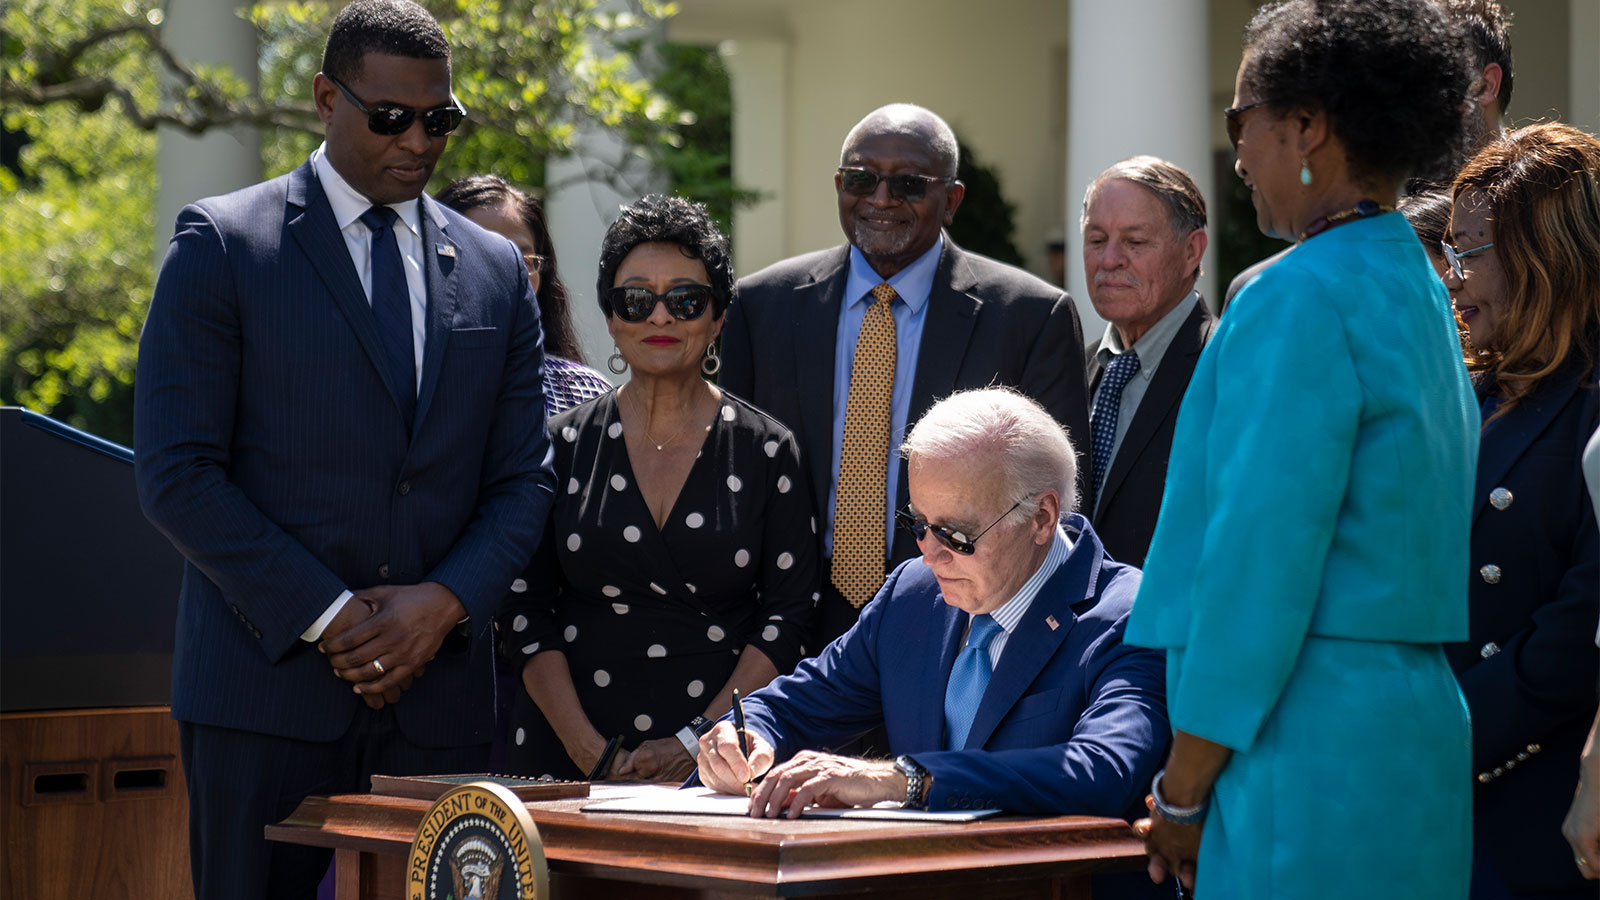 U.S. President Joe Biden is surrounded by environmental justice advocates and U.S. EPA Administrator Michael Regan as he signs an executive order addressing environmental justice issues in the Rose Garden of the White House.